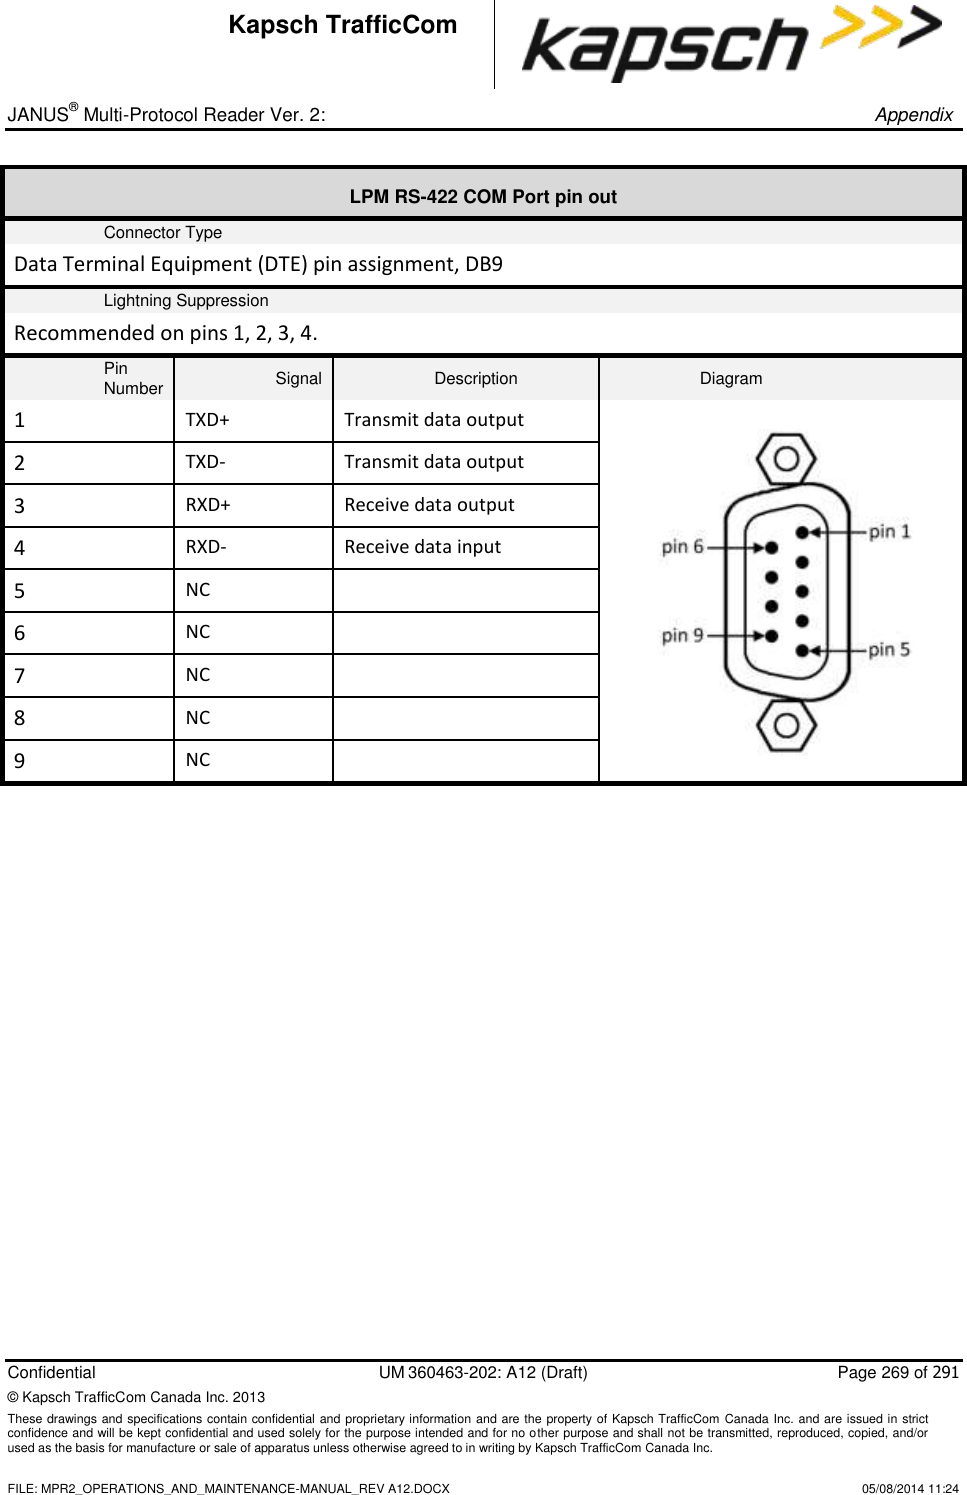 _ JANUS® Multi-Protocol Reader Ver. 2:       Appendix   Confidential  UM 360463-202: A12 (Draft)  Page 269 of 291 © Kapsch TrafficCom Canada Inc. 2013 These drawings and specifications contain confidential and proprietary information and are the property of Kapsch TrafficCom  Canada Inc. and are issued in strict confidence and will be kept confidential and used solely for the purpose intended and for no other purpose and shall not be transmitted, reproduced, copied, and/or used as the basis for manufacture or sale of apparatus unless otherwise agreed to in writing by Kapsch TrafficCom Canada Inc.    FILE: MPR2_OPERATIONS_AND_MAINTENANCE-MANUAL_REV A12.DOCX    05/08/2014 11:24 Kapsch TrafficCom LPM RS-422 COM Port pin out Connector Type Data Terminal Equipment (DTE) pin assignment, DB9  Lightning Suppression Recommended on pins 1, 2, 3, 4. Pin Number Signal Description Diagram 1 TXD+ Transmit data output  2 TXD- Transmit data output 3 RXD+ Receive data output 4 RXD- Receive data input 5 NC  6 NC  7 NC  8 NC  9 NC           